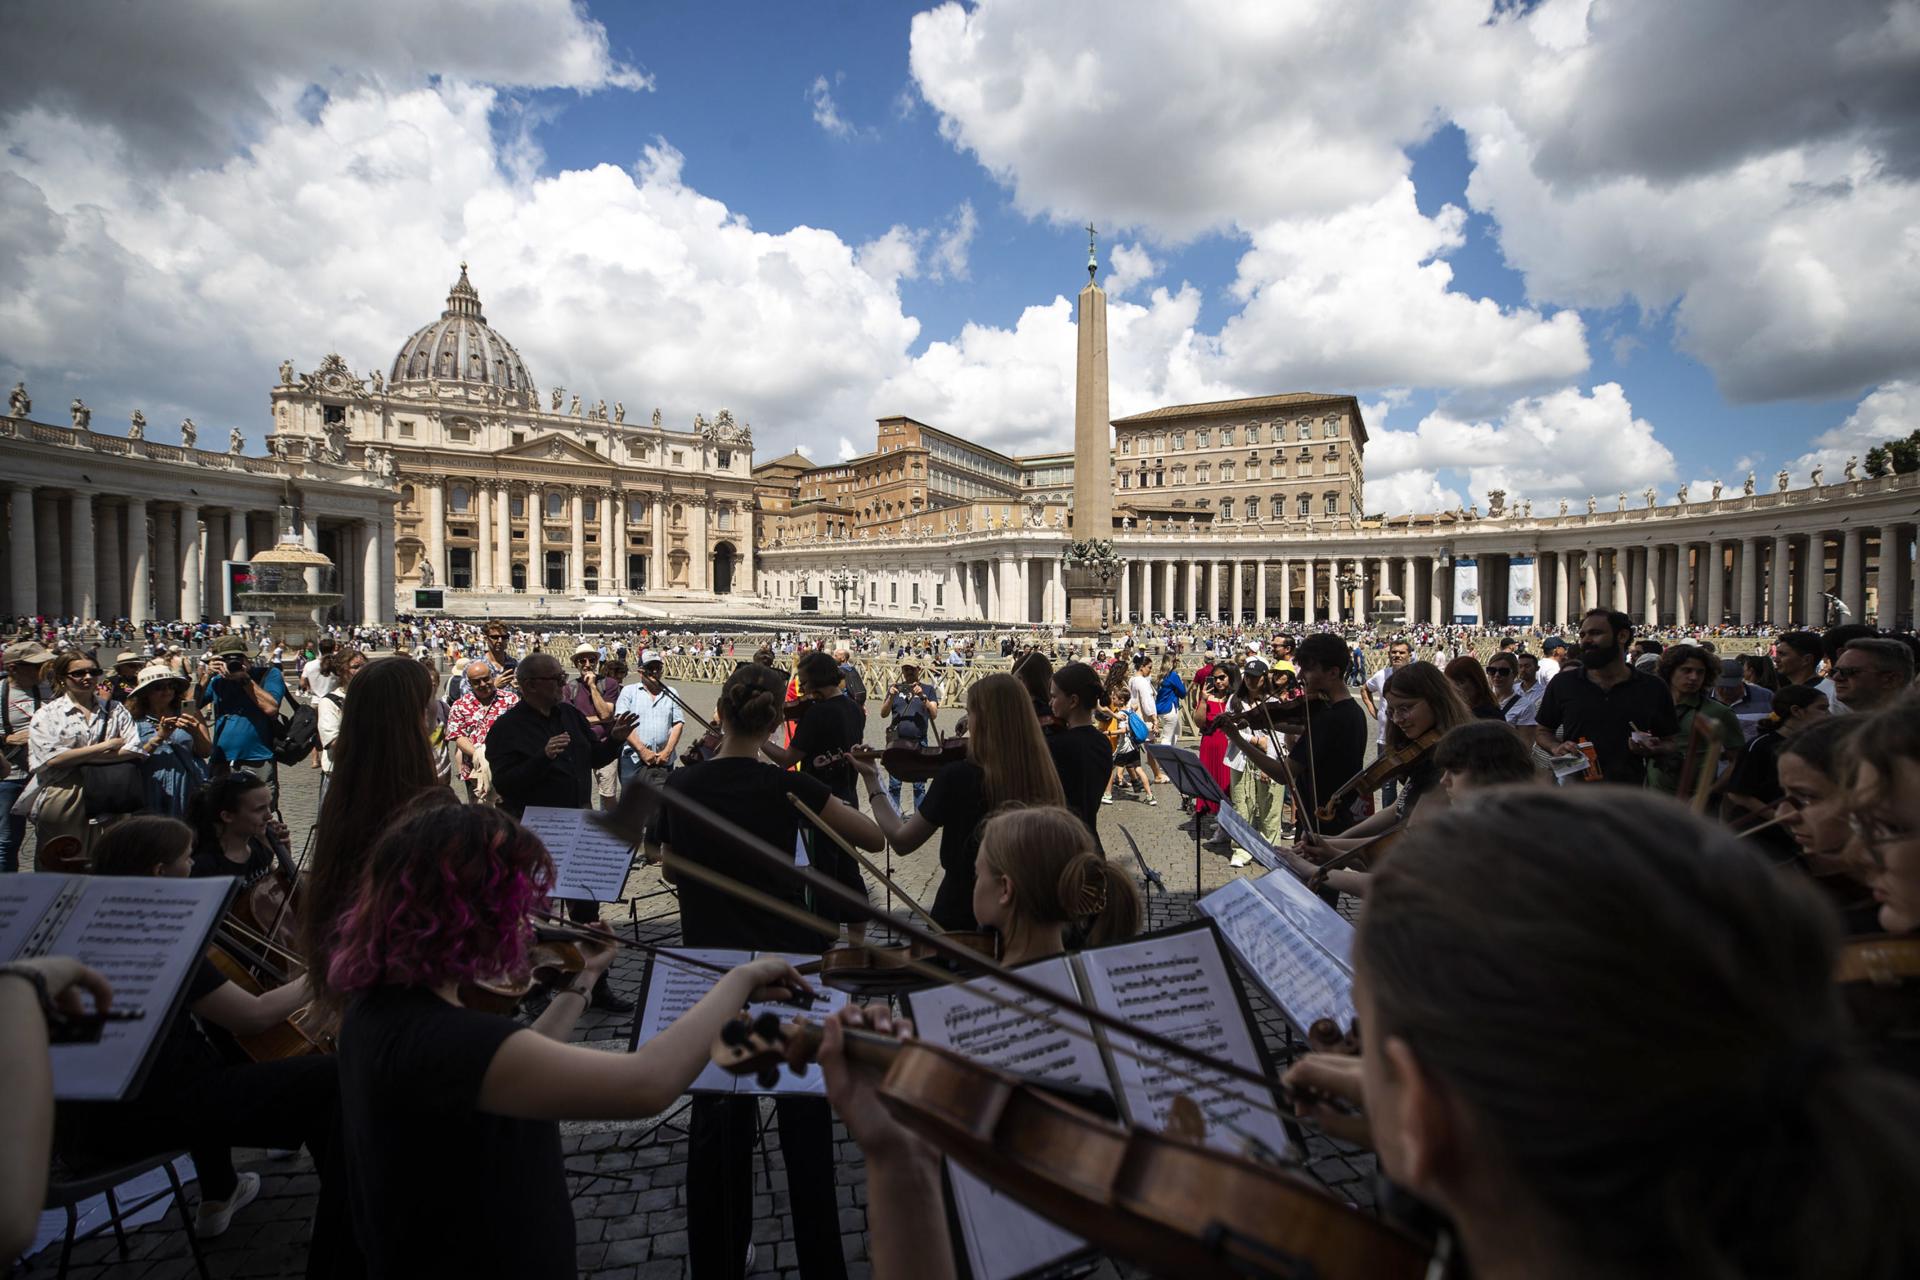 Members of a German folk band gather for the Angelus prayer in Saint Peter's square, that Pope Francis celebrated privately at the Agostino Gemelli University Hospital where he was hospitalized, Vatican City, 11 June 2023. EFE/EPA/ANGELO CARCONI